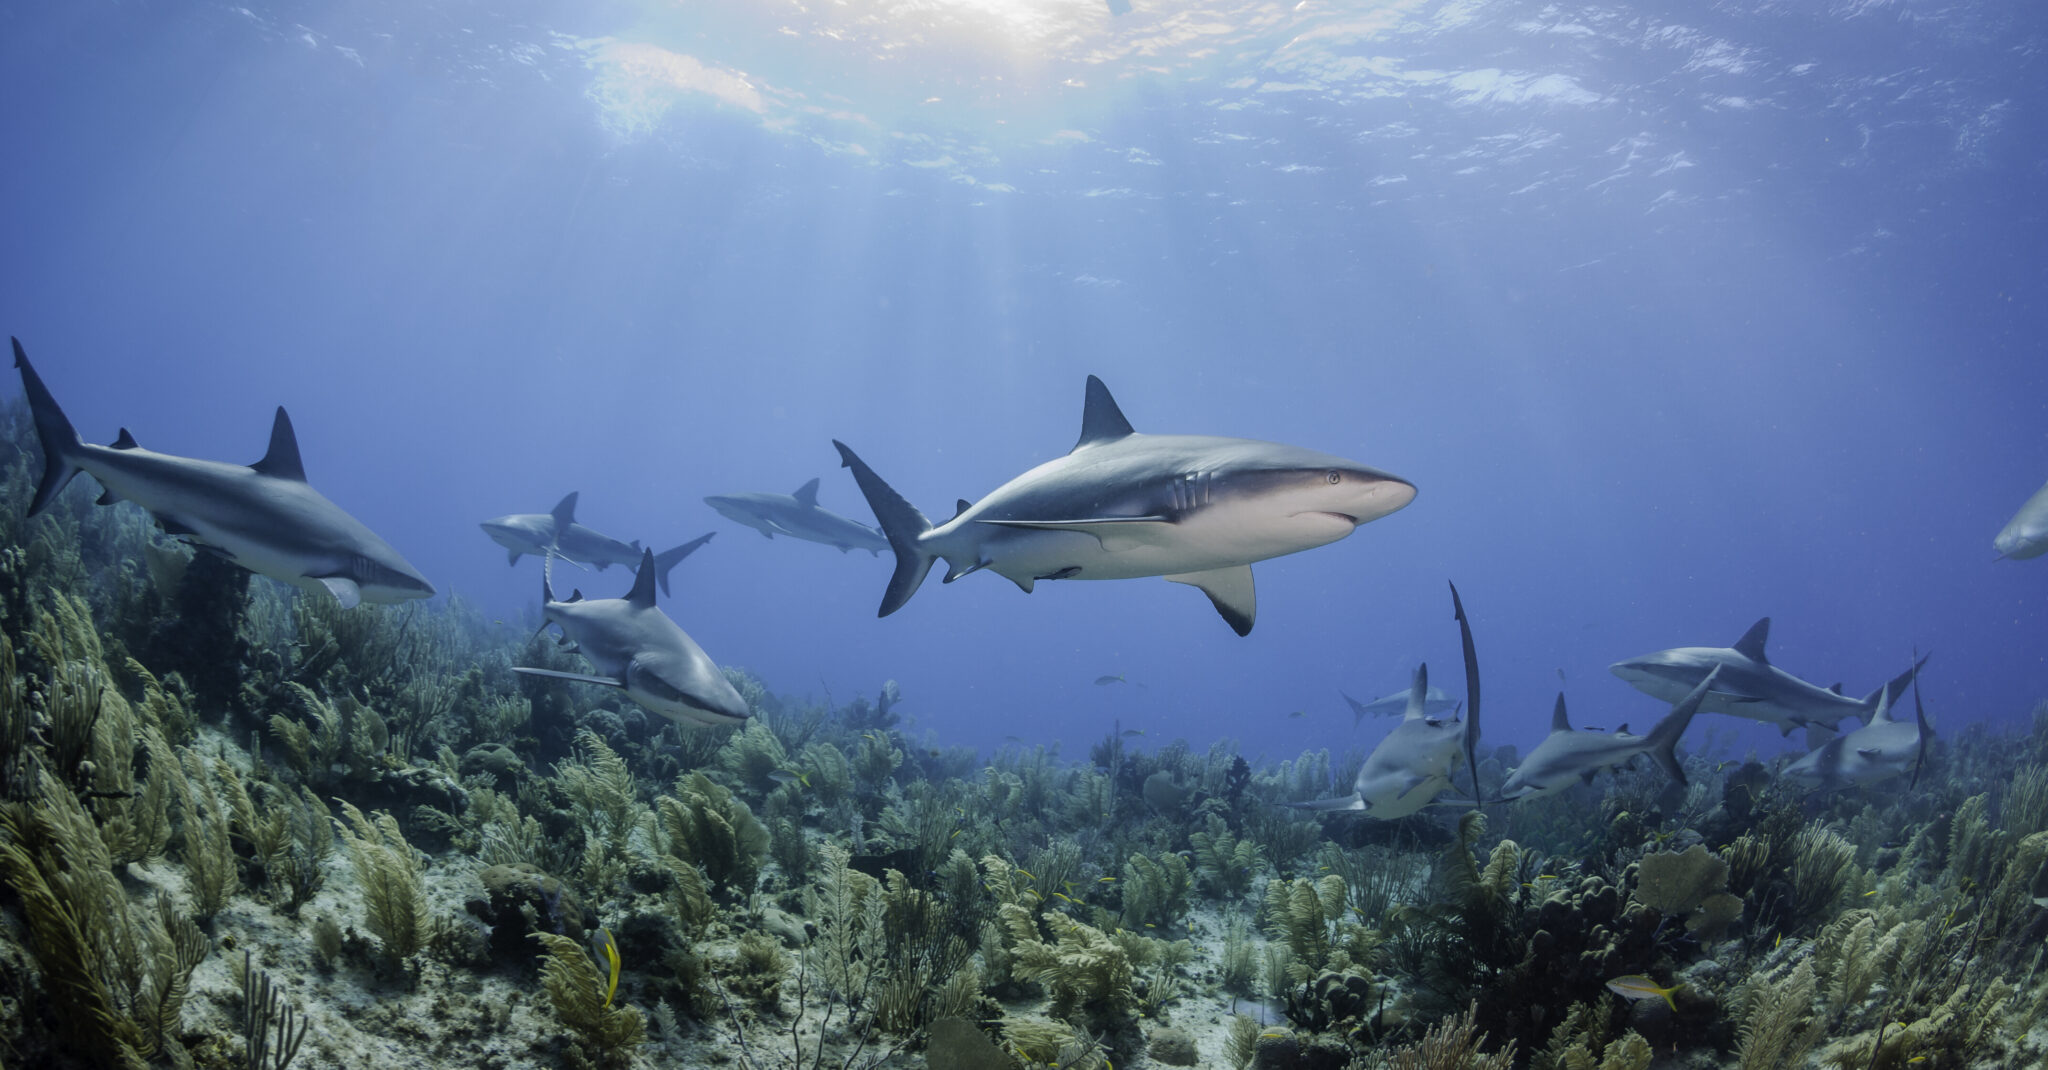 Dozens of Caribbean reef sharks in Cuba, which has some of the best Caribbean liveaboard diving at Jardines de la Reina